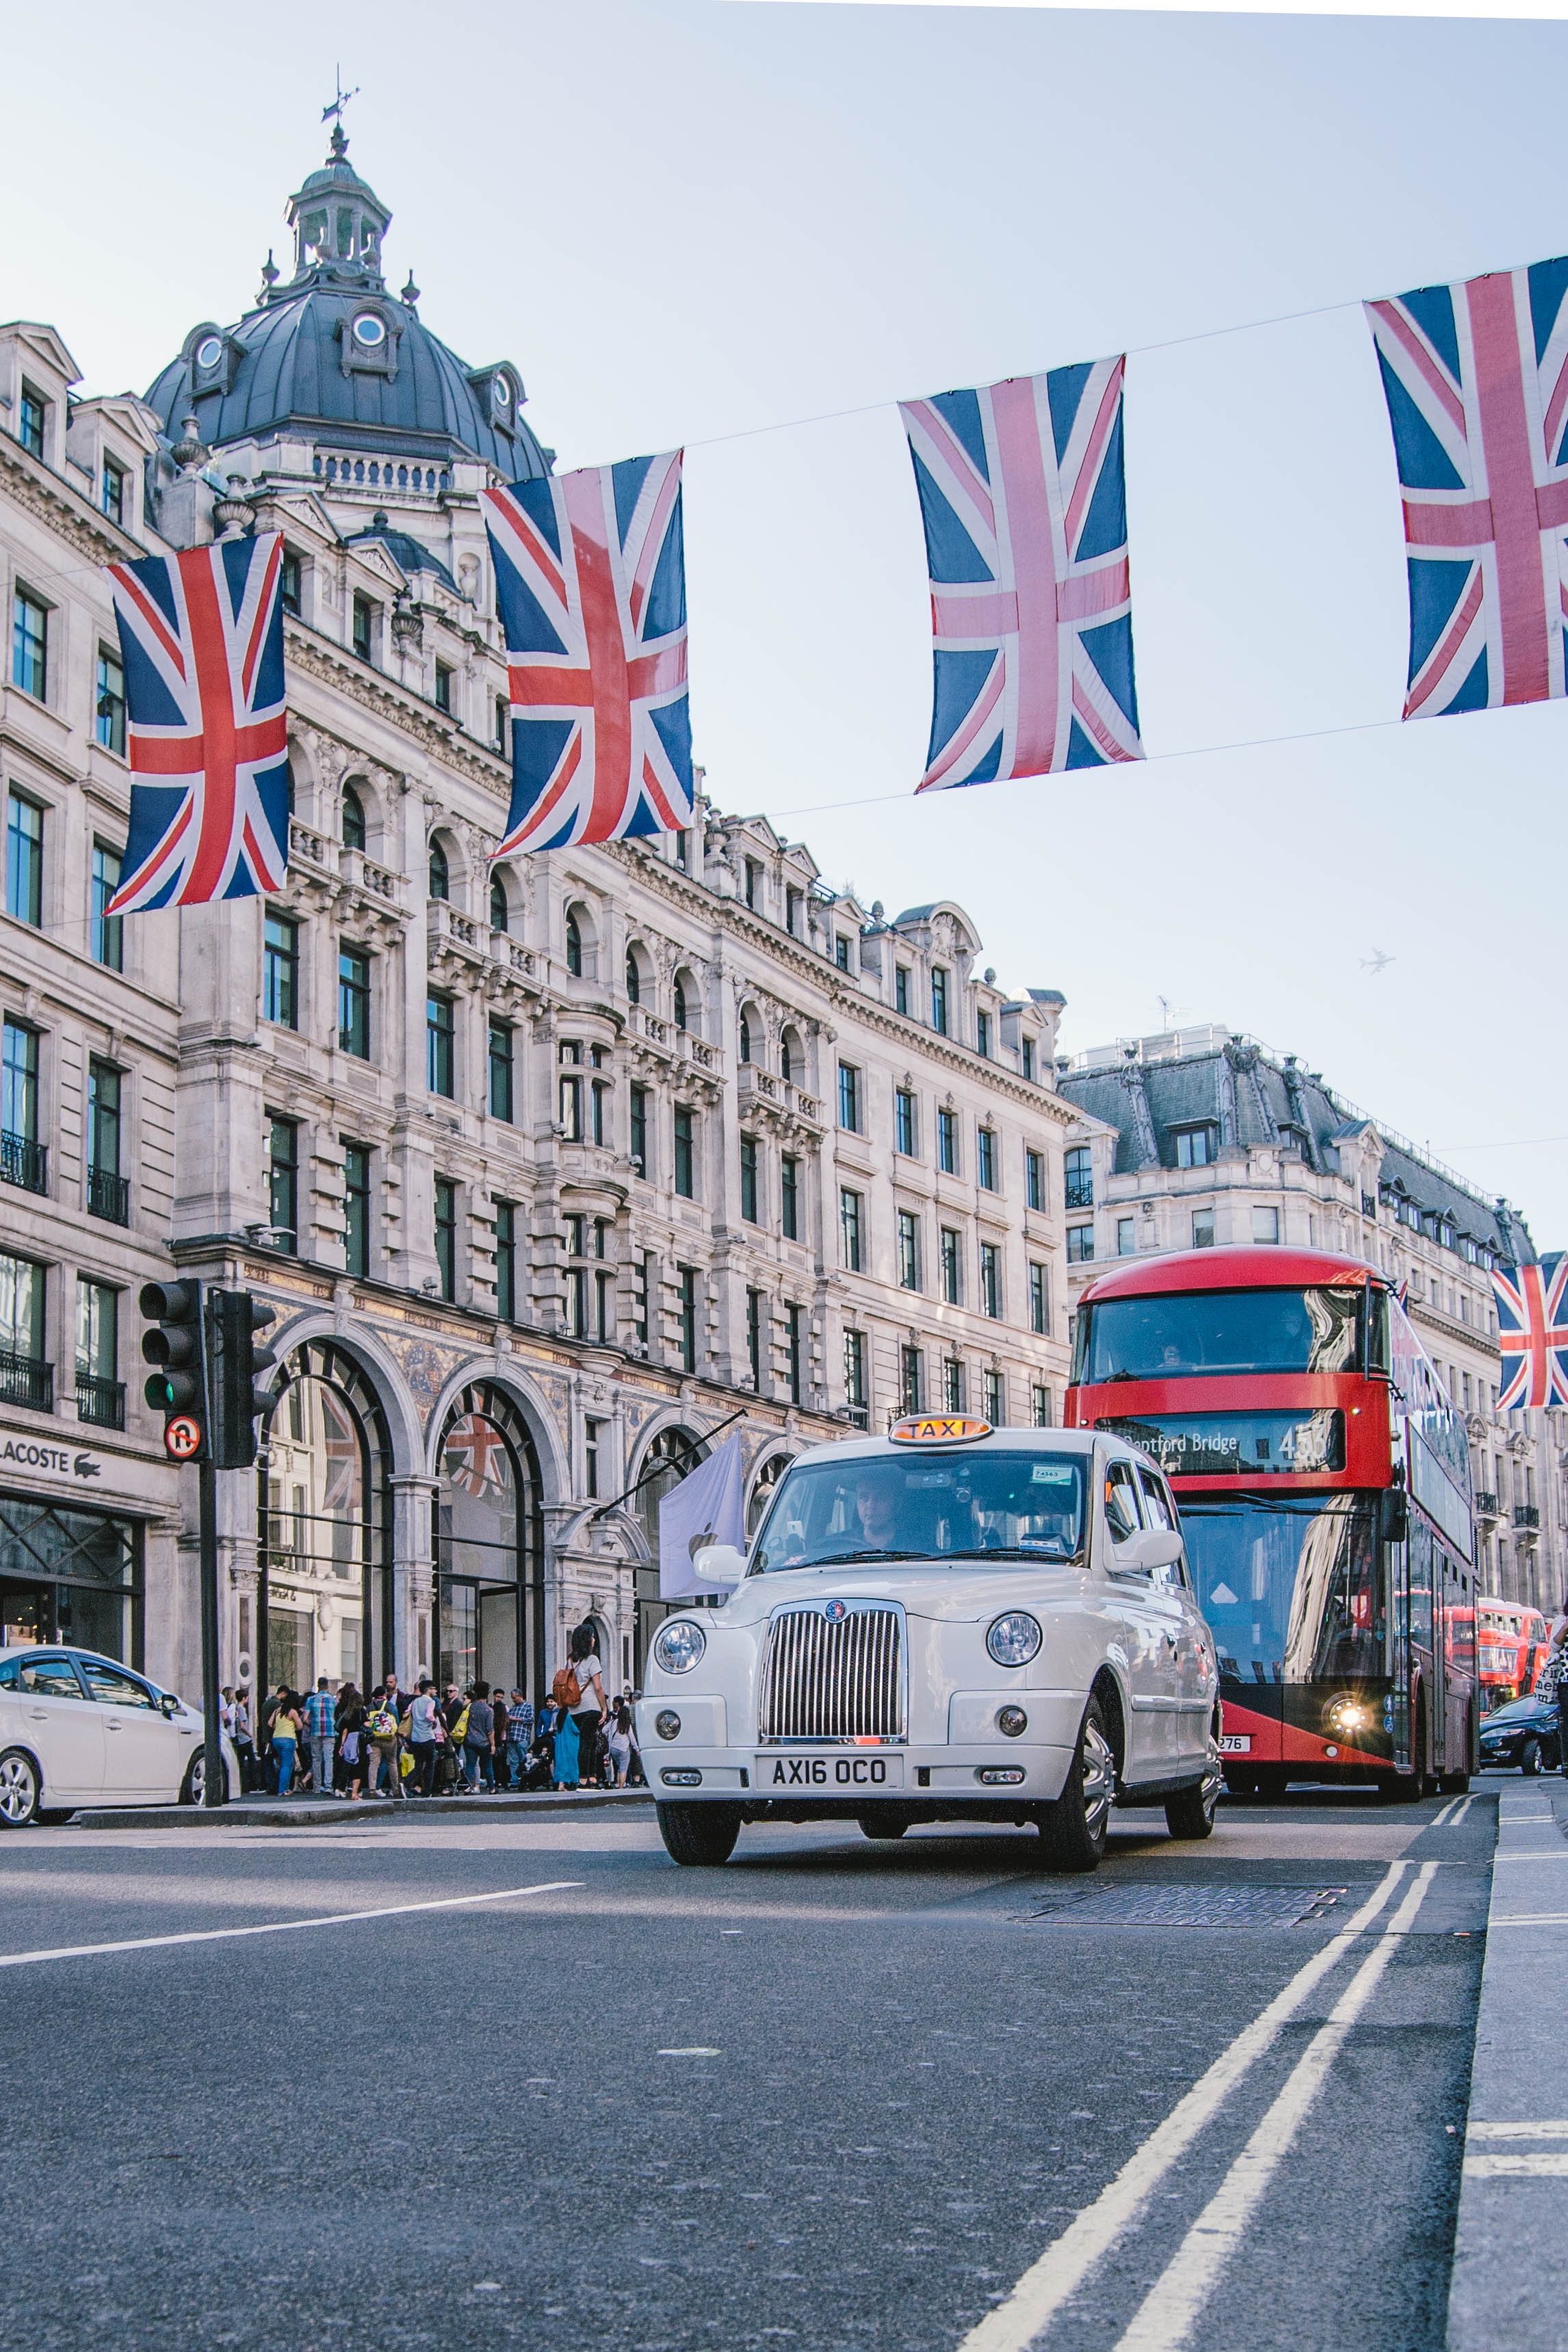 Flight Deal: Fly Nonstop From L.A. To London For $446